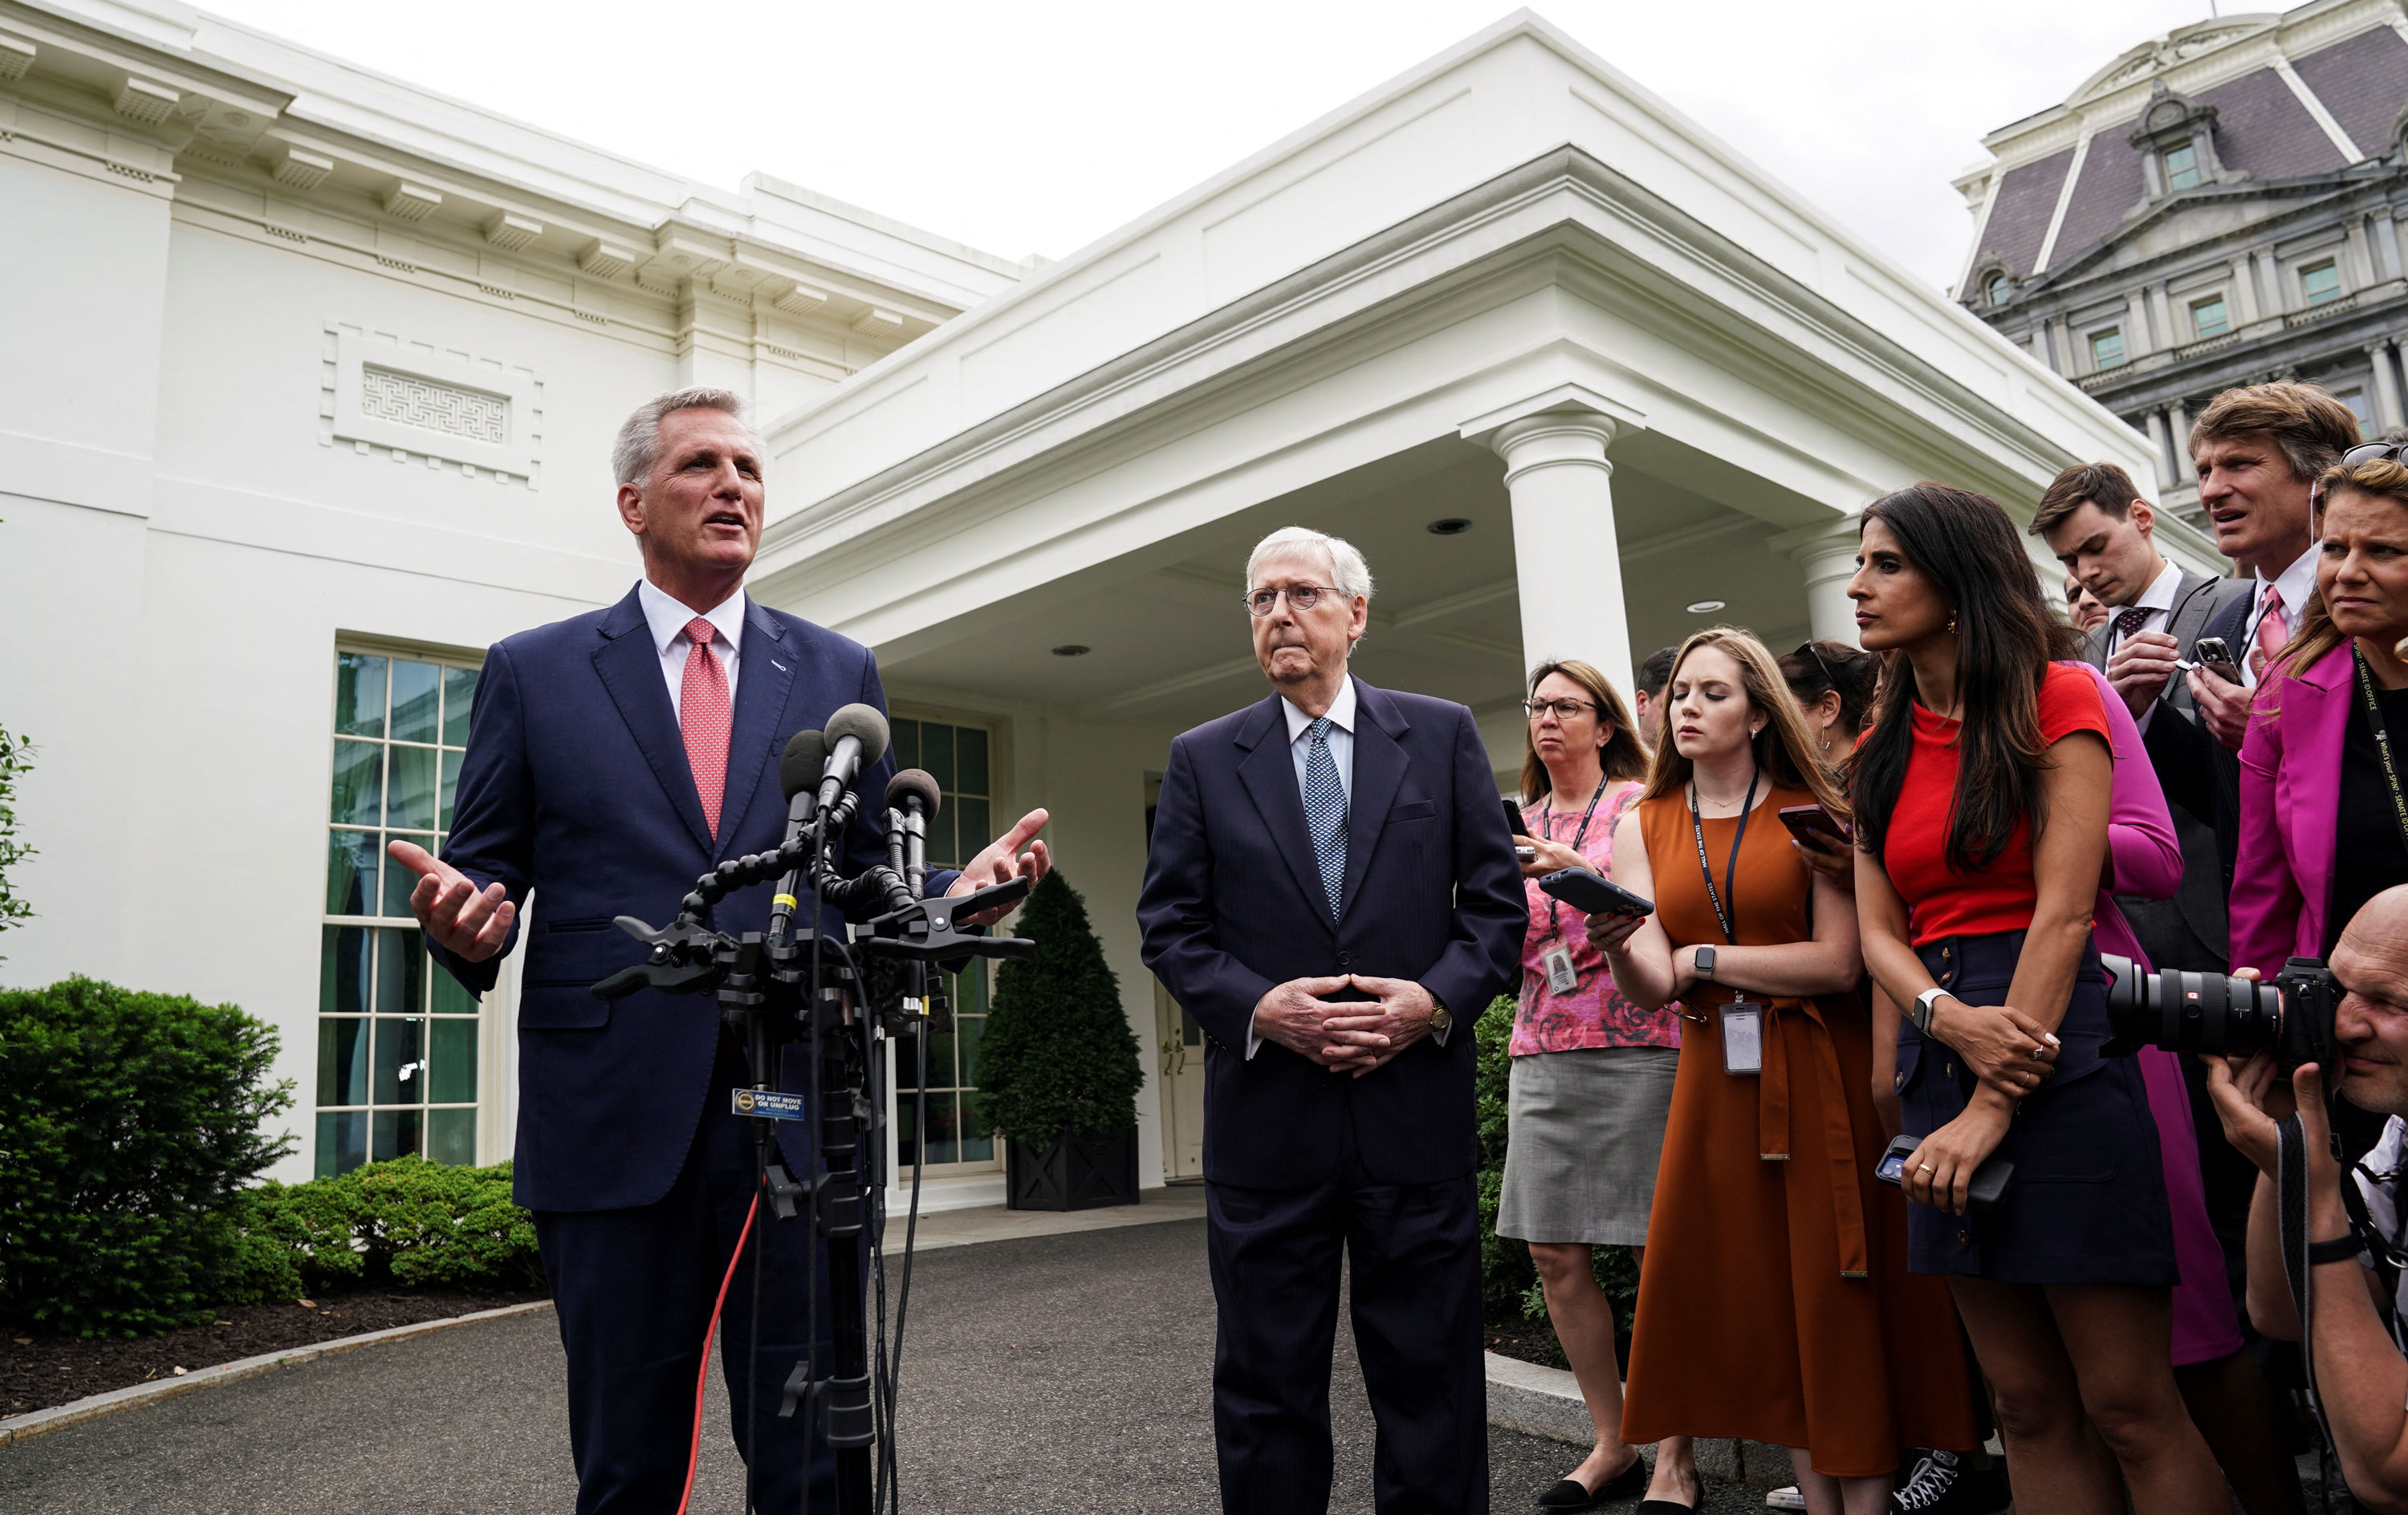 House Speaker Kevin McCarthy (R-CA) speaks to reporters with Senate Republican Leader Mitch McConnell (R-KY) outside the West Wing following debt limit talks with President Joe Biden and Congressional leaders at the White House in Washington, D.C. on May 16, 2023.